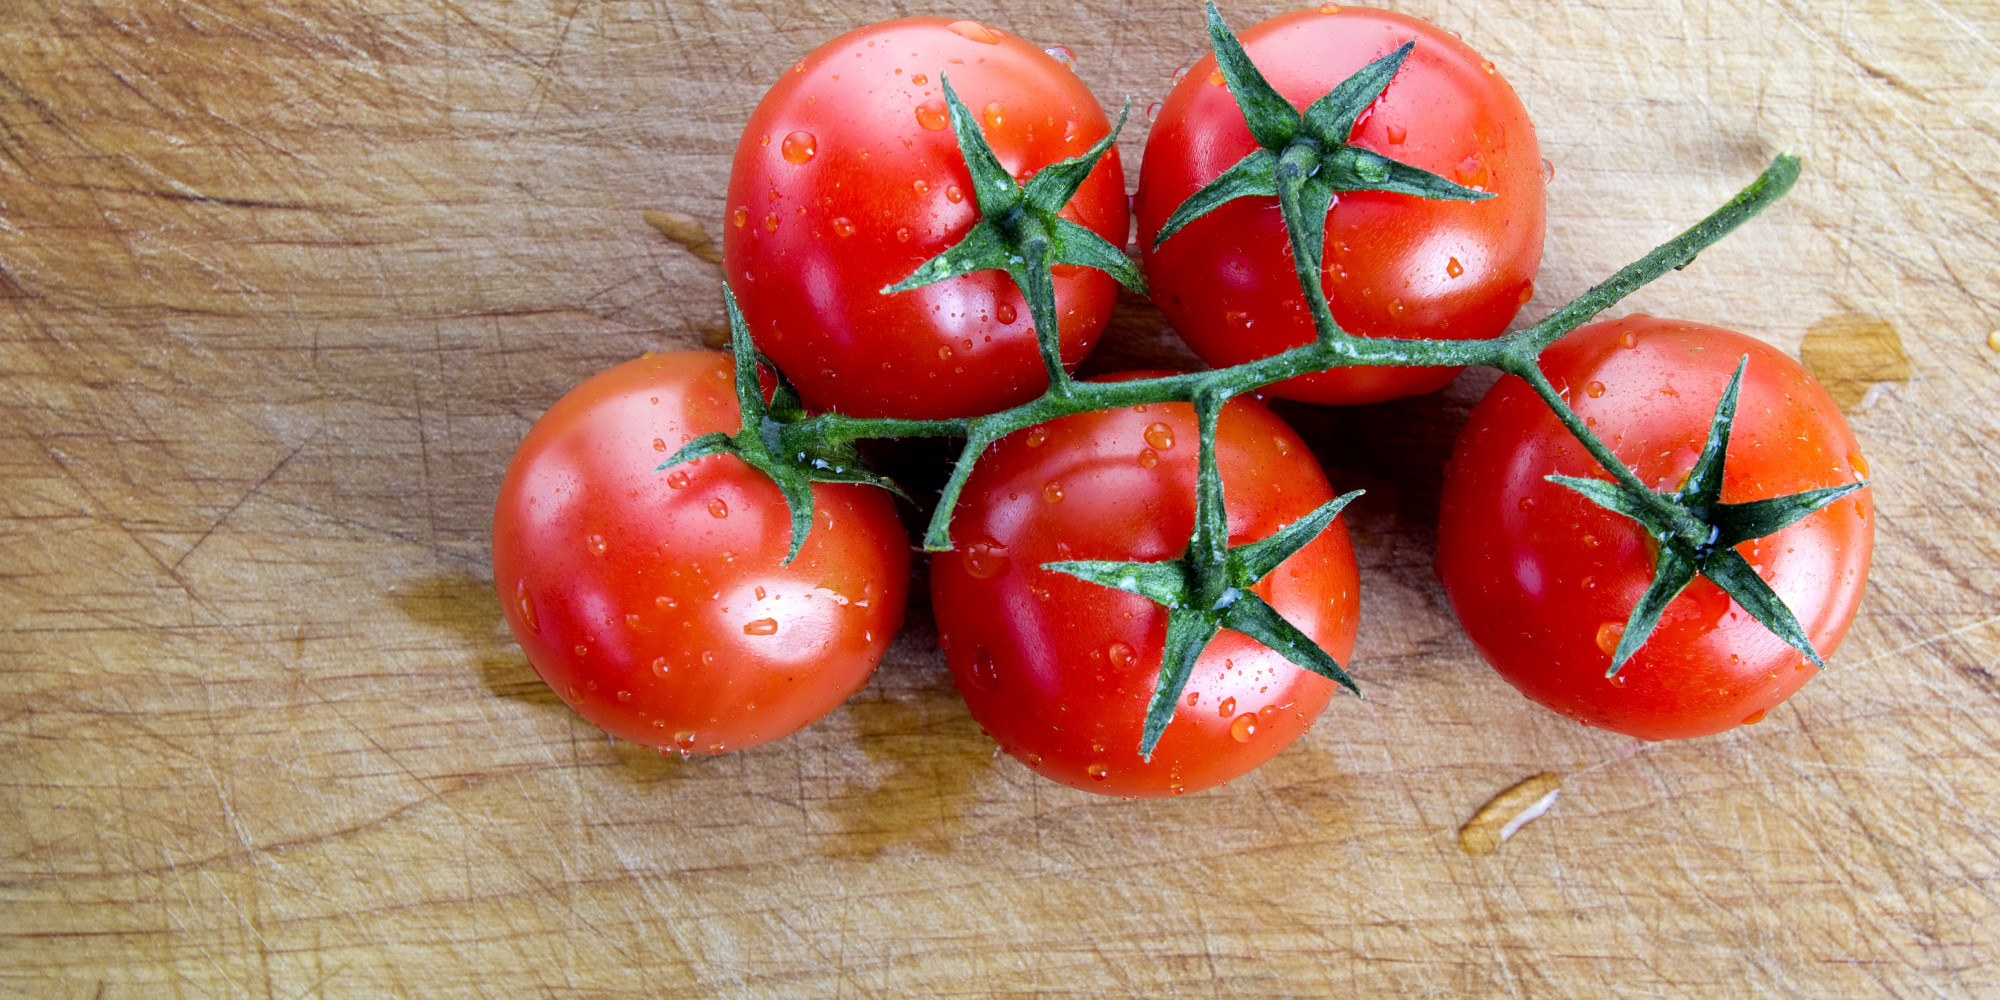 Tomato-Rich Diet Could Help Protect Against Breast Cancer, Small Study Suggests | HuffPost2000 x 1000